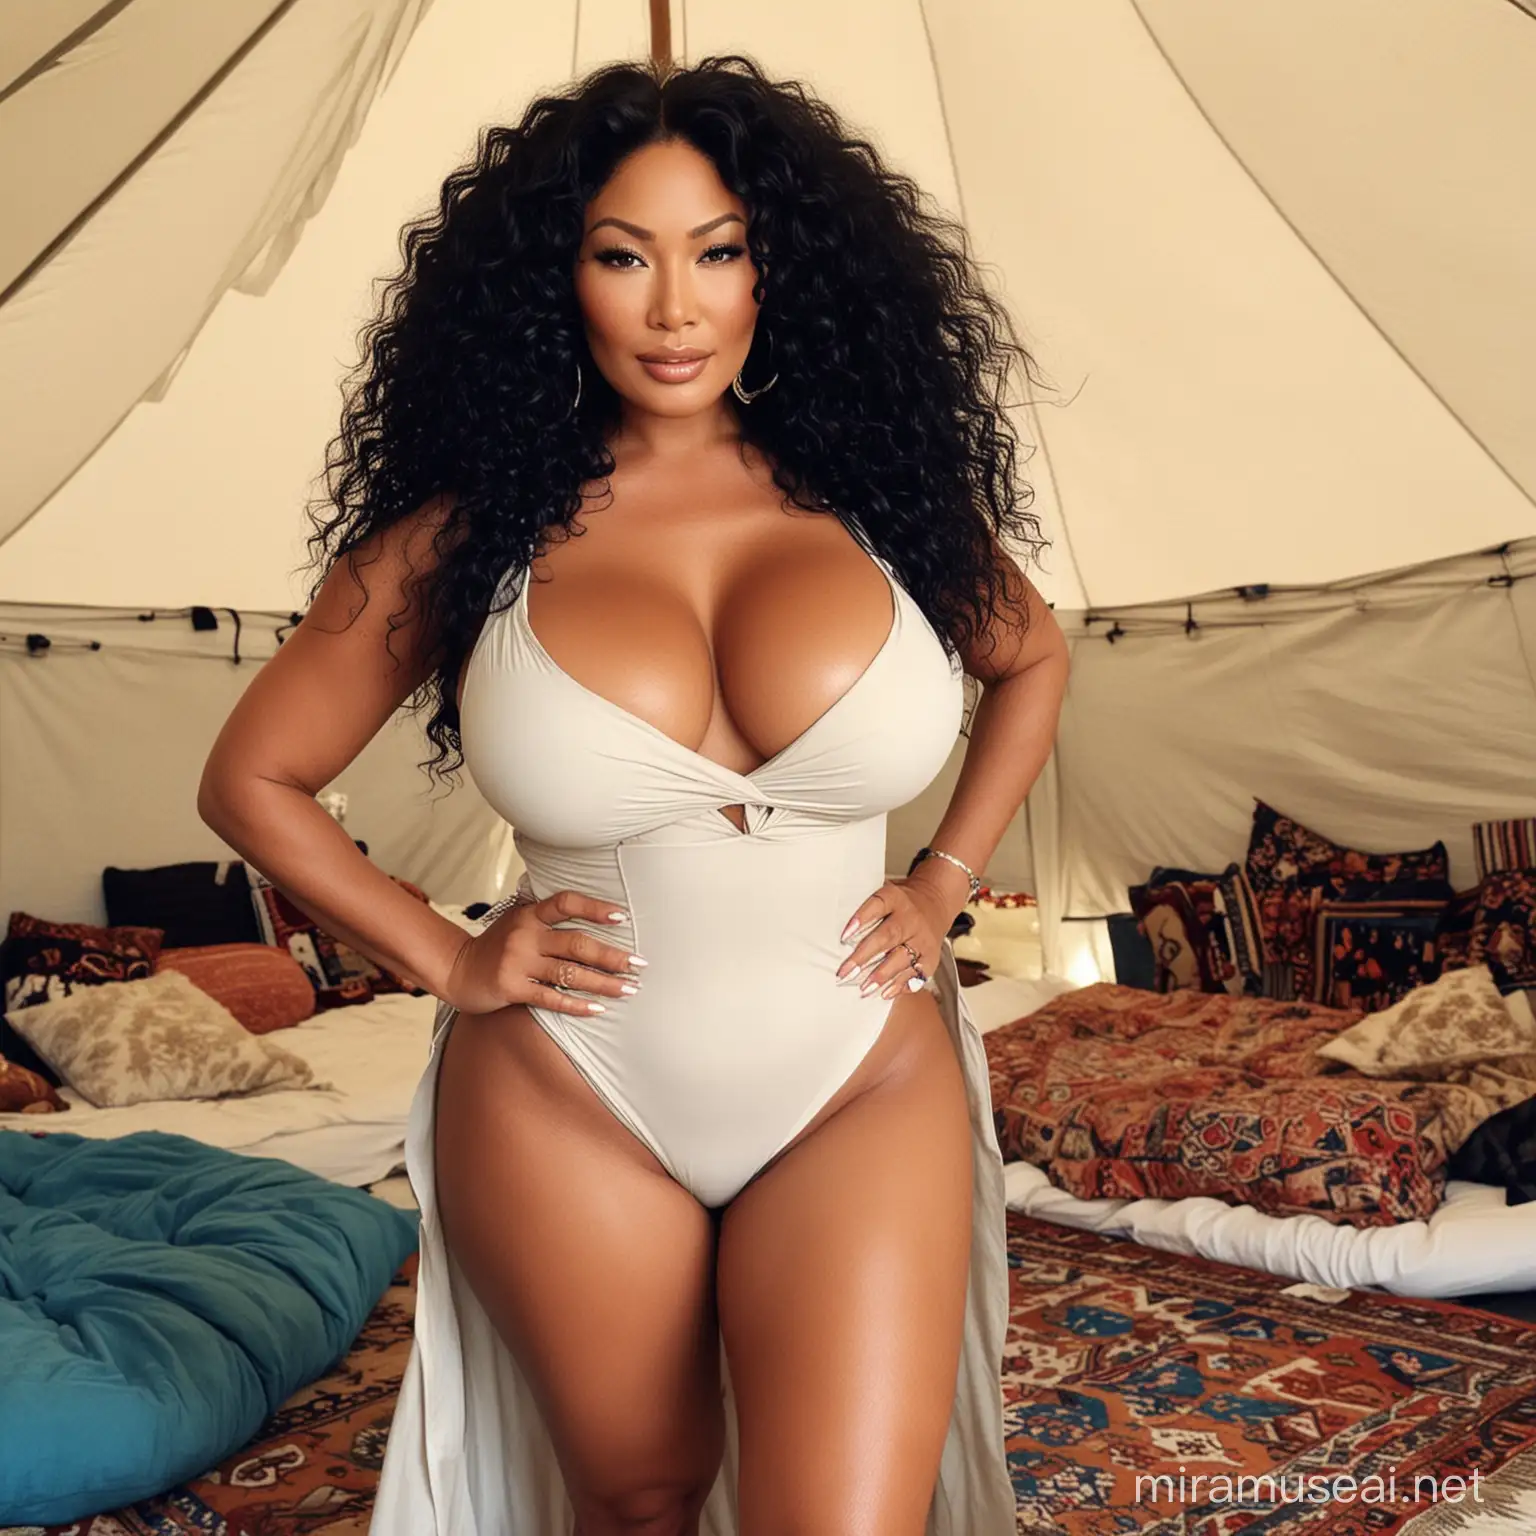 Kimora Lee Simmons in a tent, kinky hair, bbw, giant breasts, massive cleavage